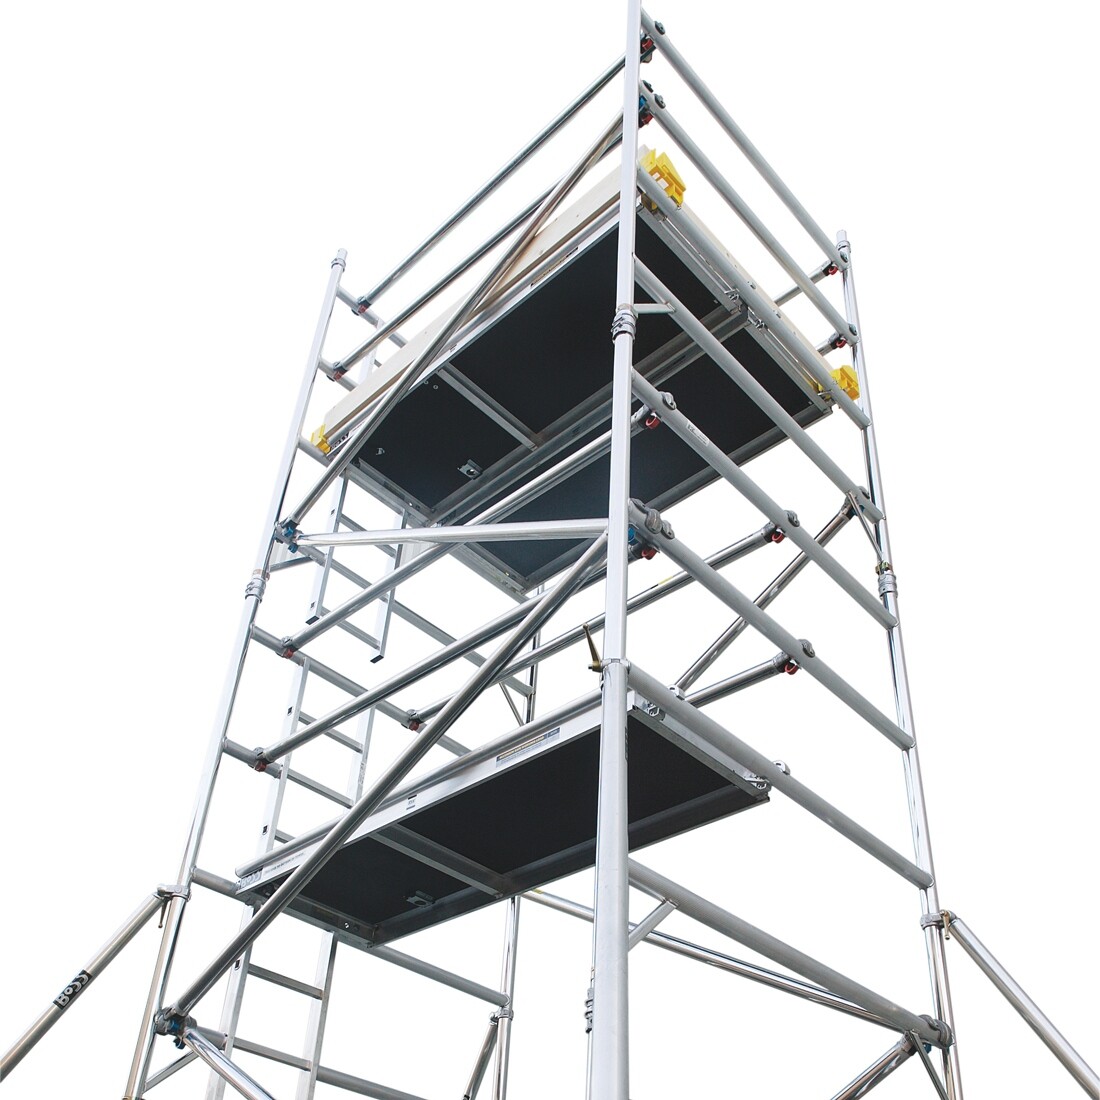 Aluminium Mobile Access Tower - 0.8m Wide x 1.8m or 2.7m Long